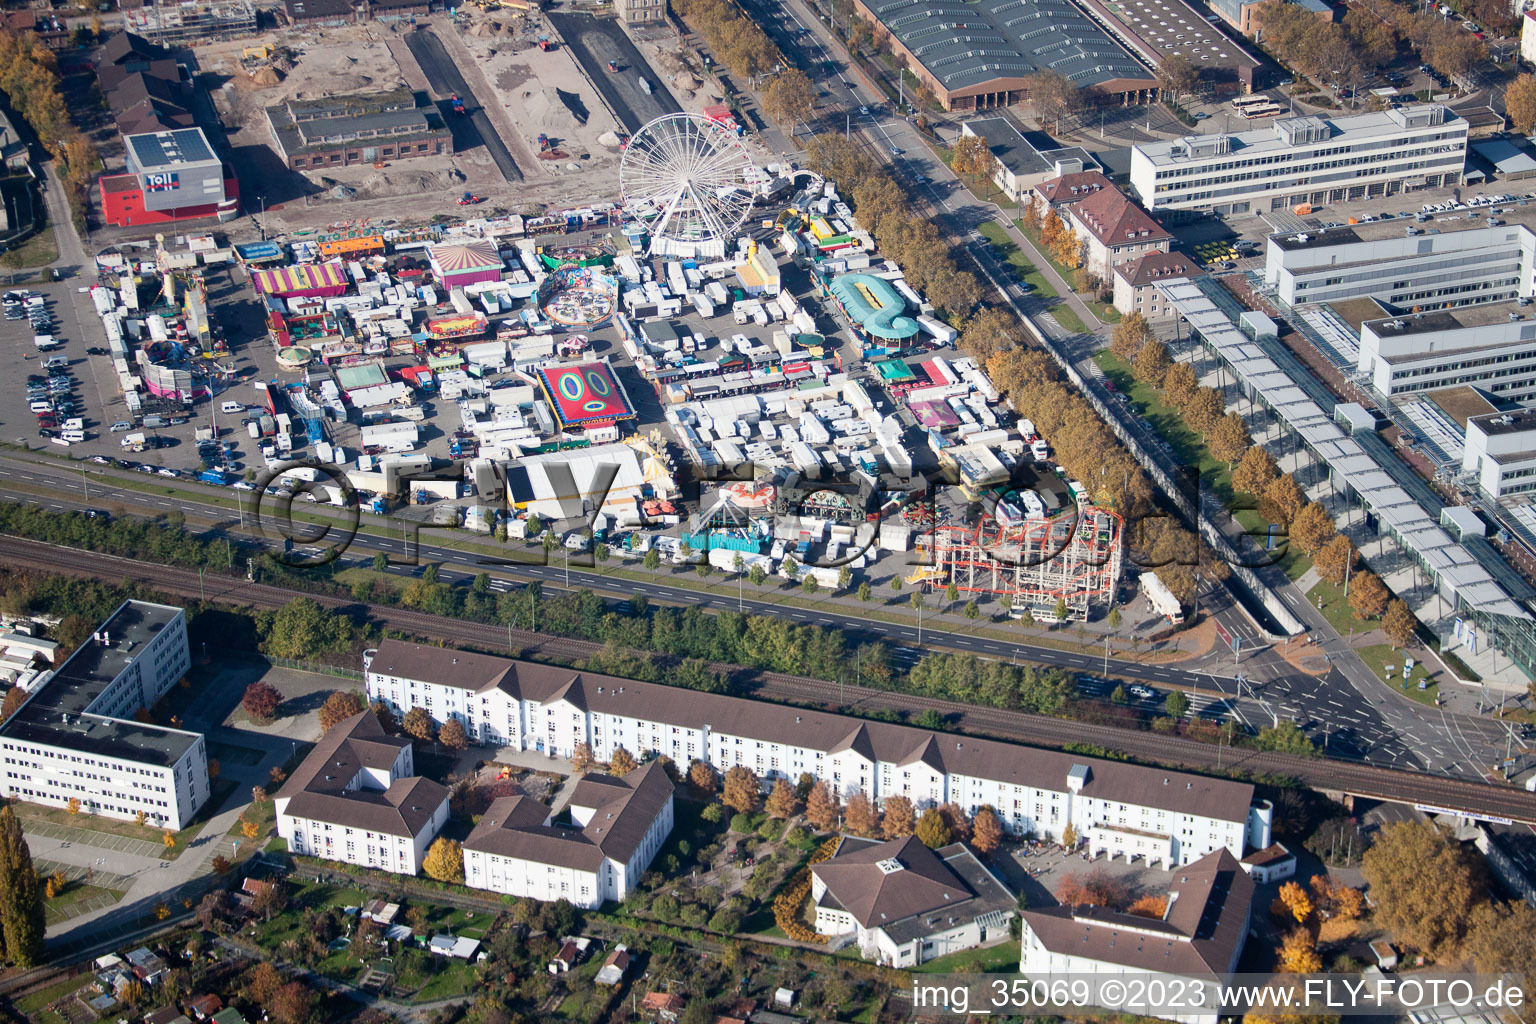 Aerial photograpy of Measuring station in the district Oststadt in Karlsruhe in the state Baden-Wuerttemberg, Germany